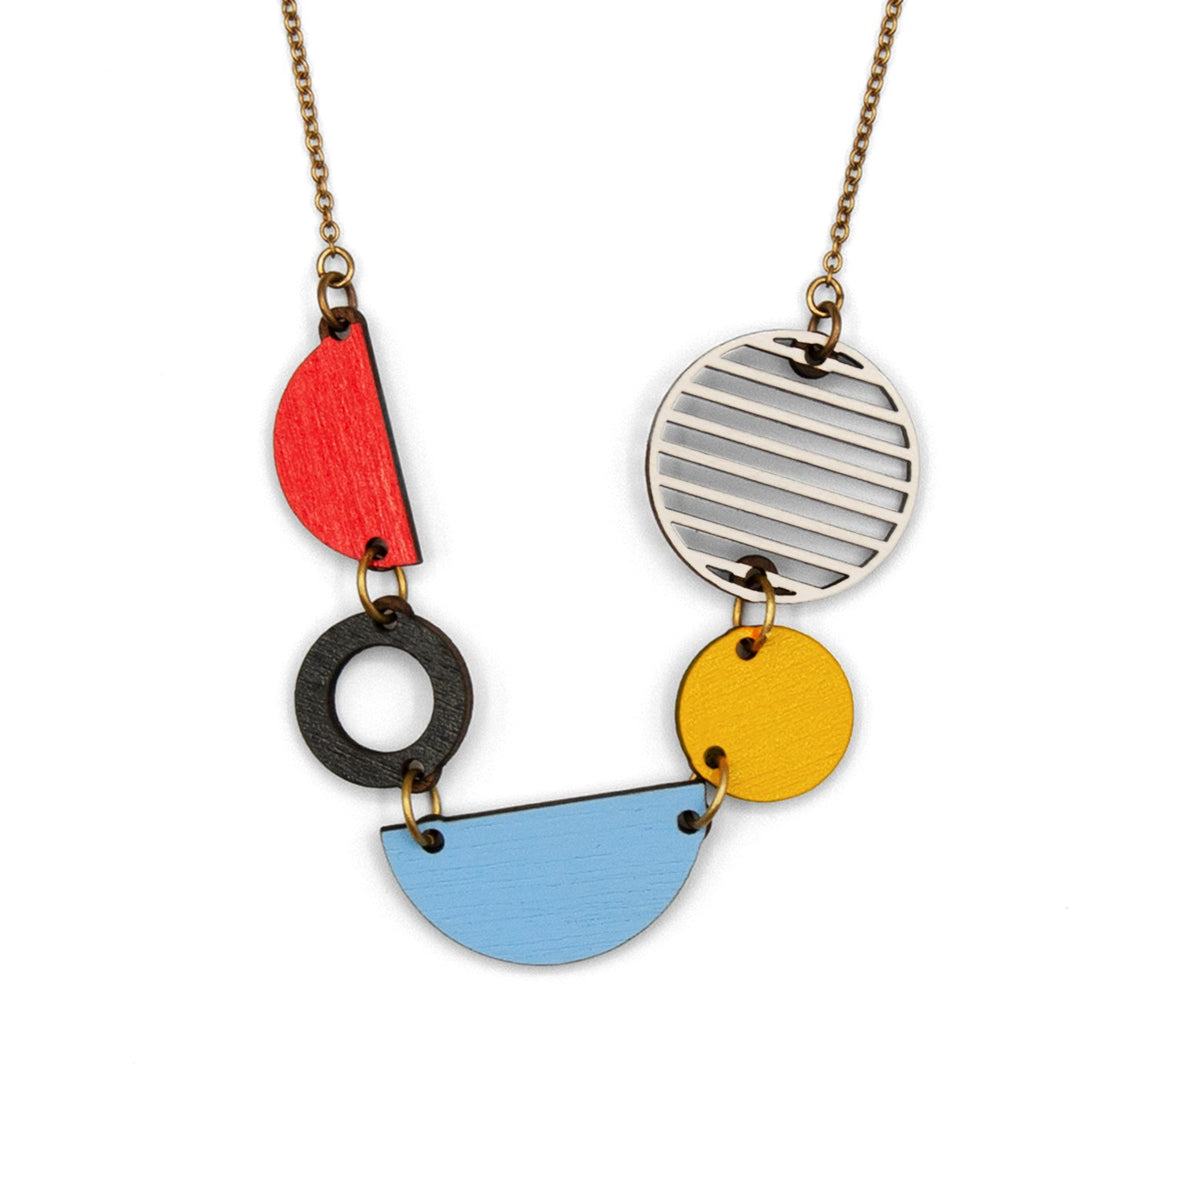 Materia Rica 5 Abstract Shapes Necklace